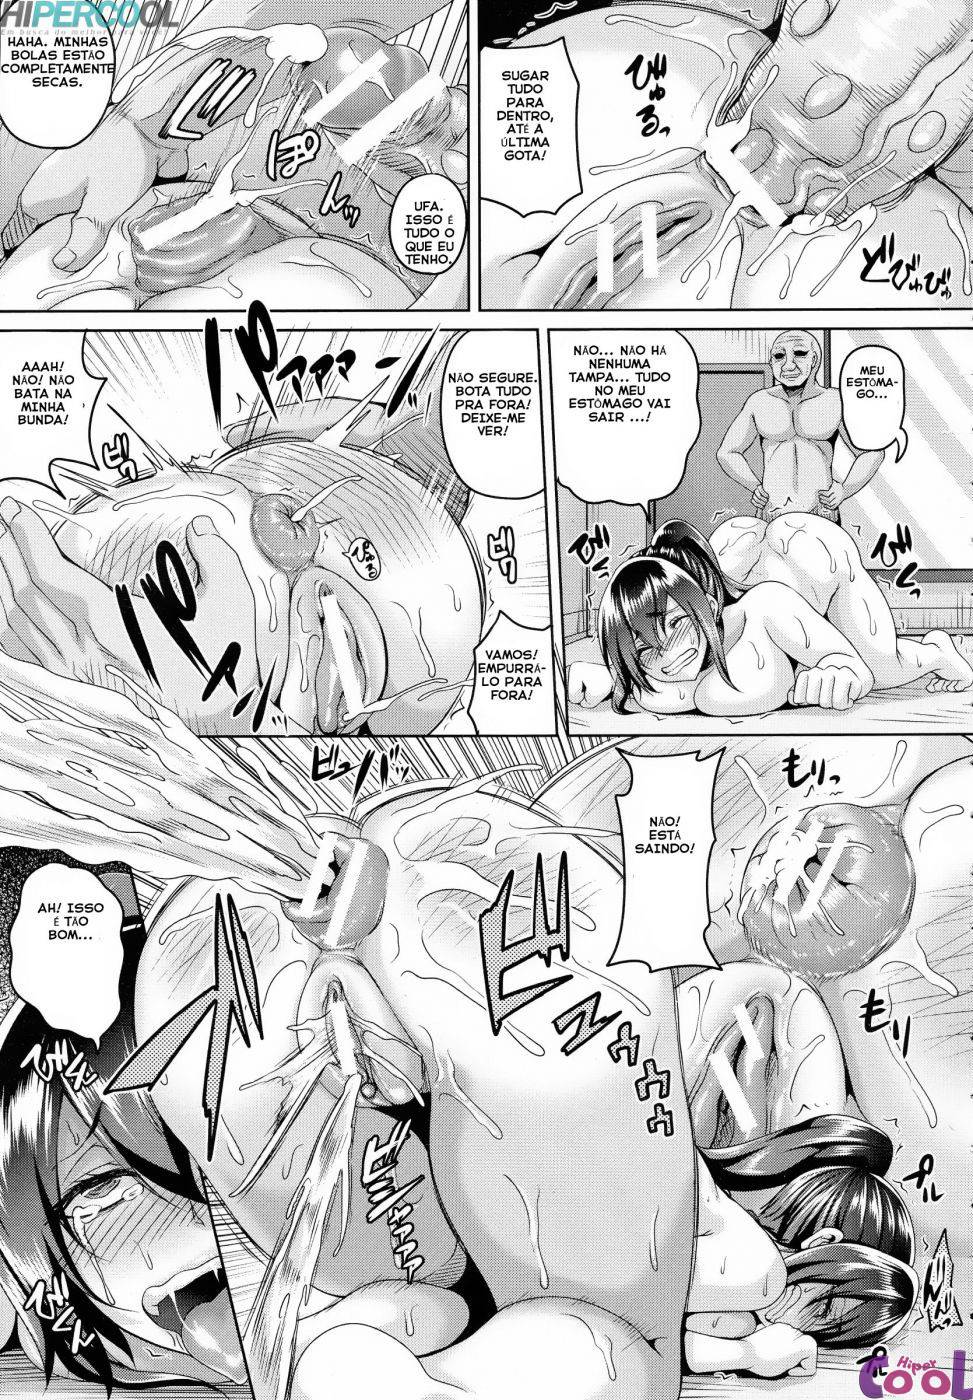 maid-rei-collection-chapter-01-page-23.jpg